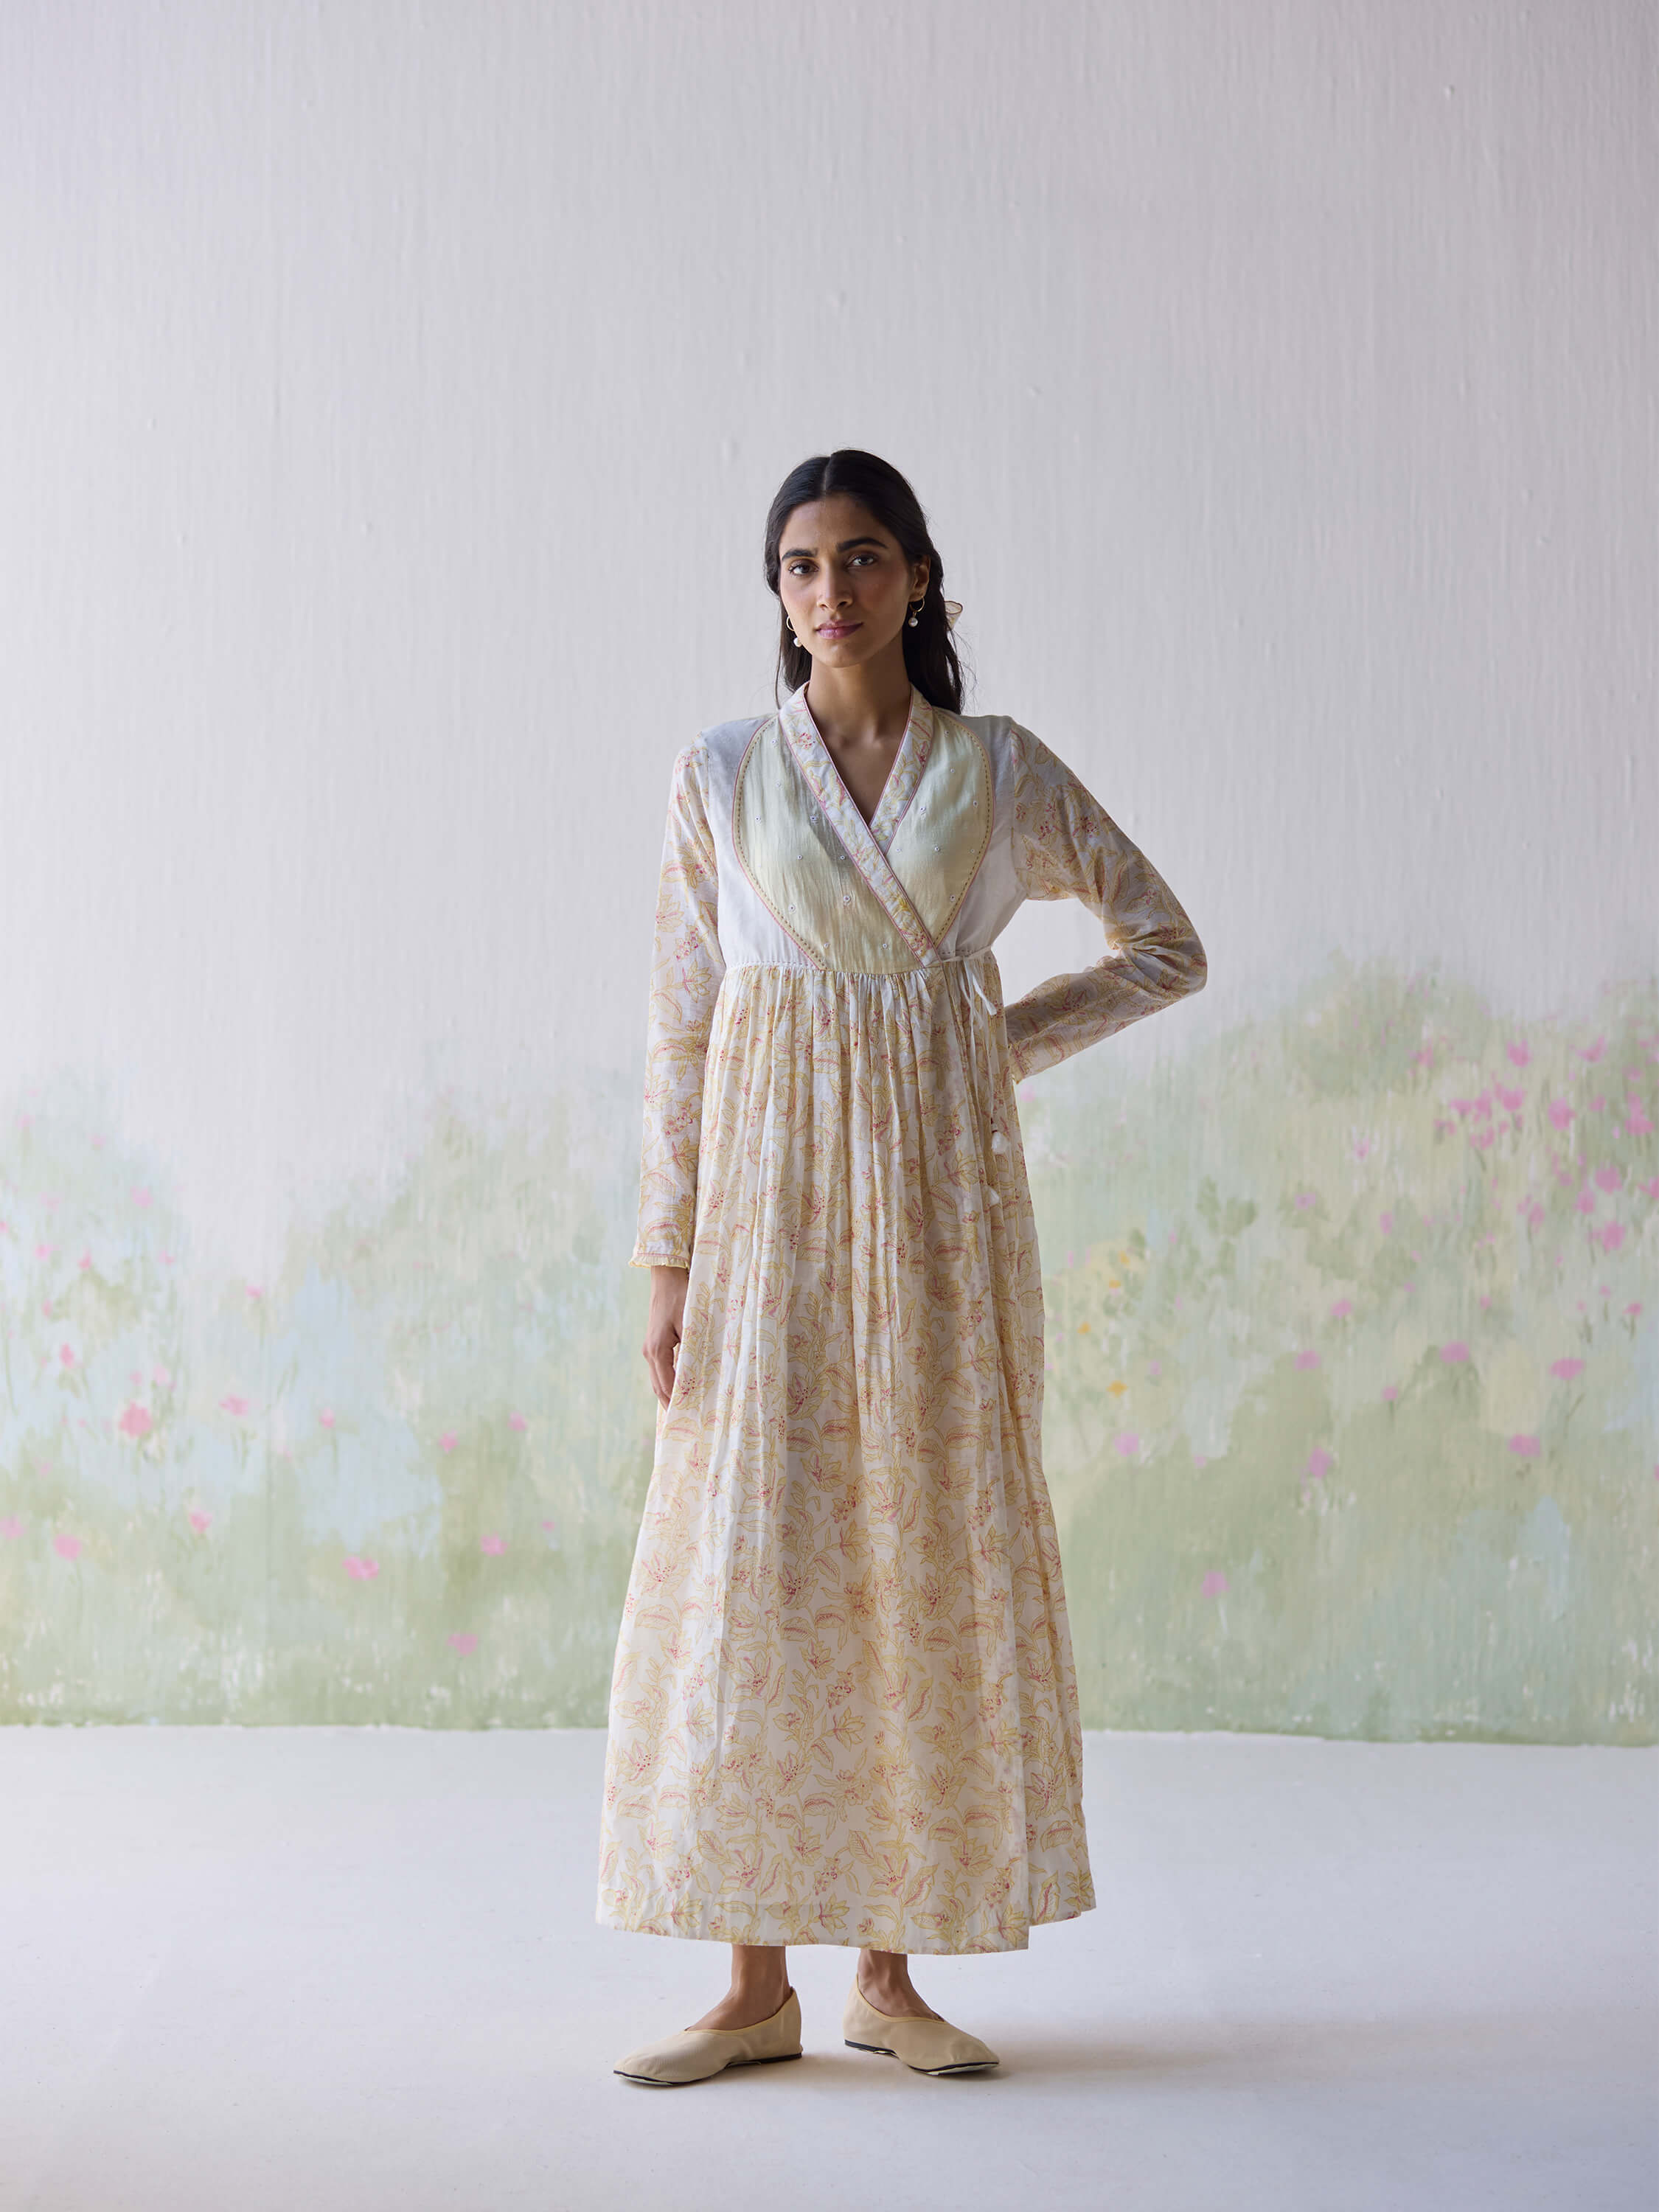 Woman wearing a long floral dress in a minimalist setting.